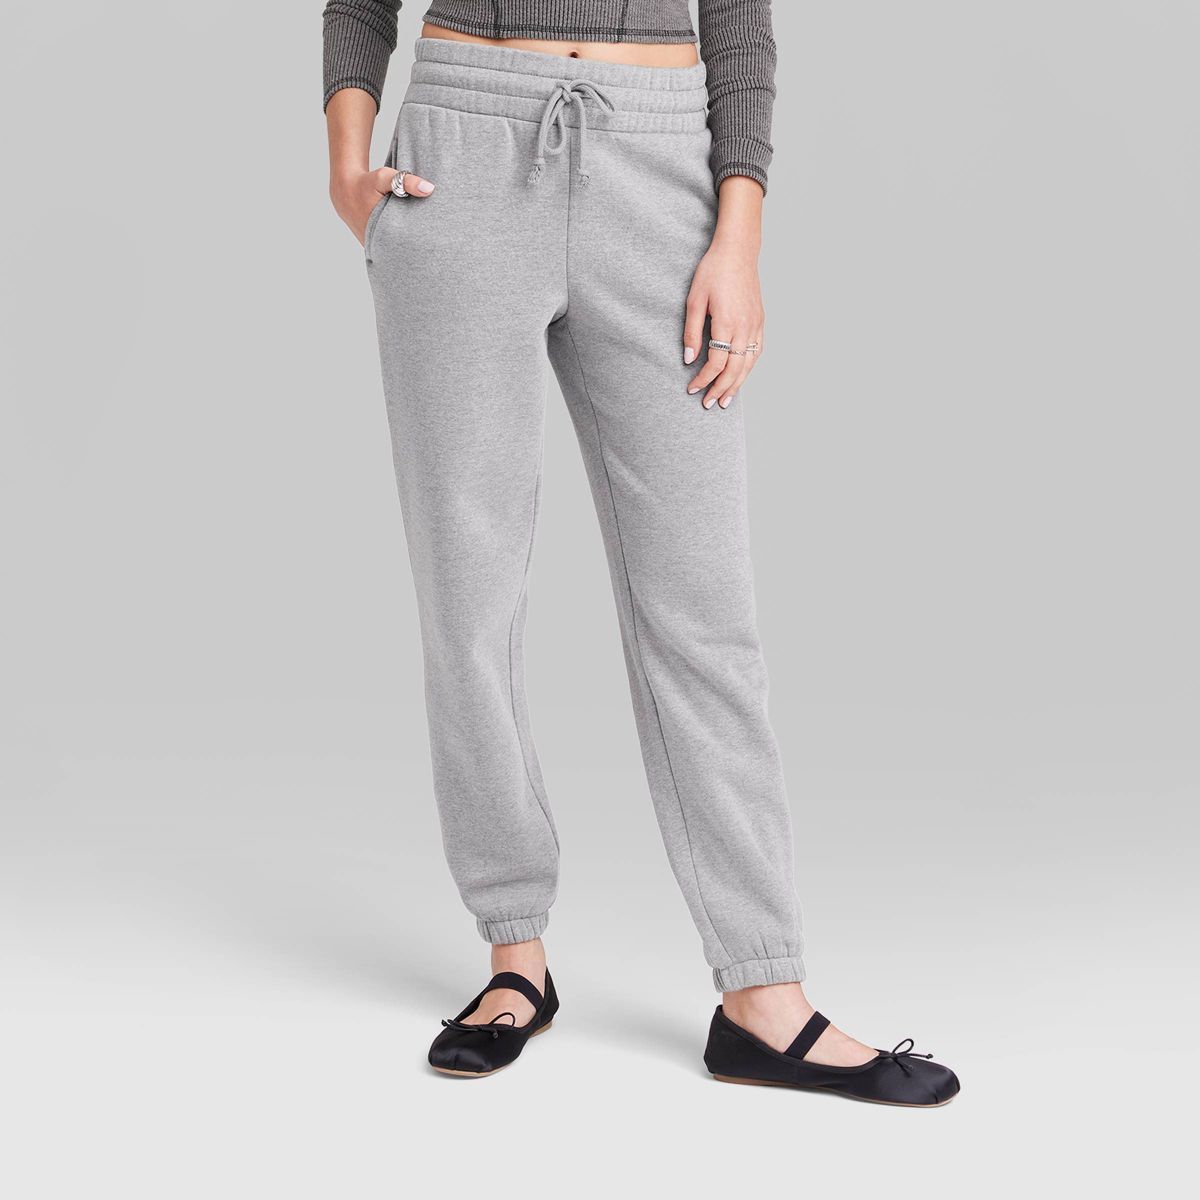 Women's High-Rise Tapered Sweatpants - Wild Fable™ Heather Gray S | Target